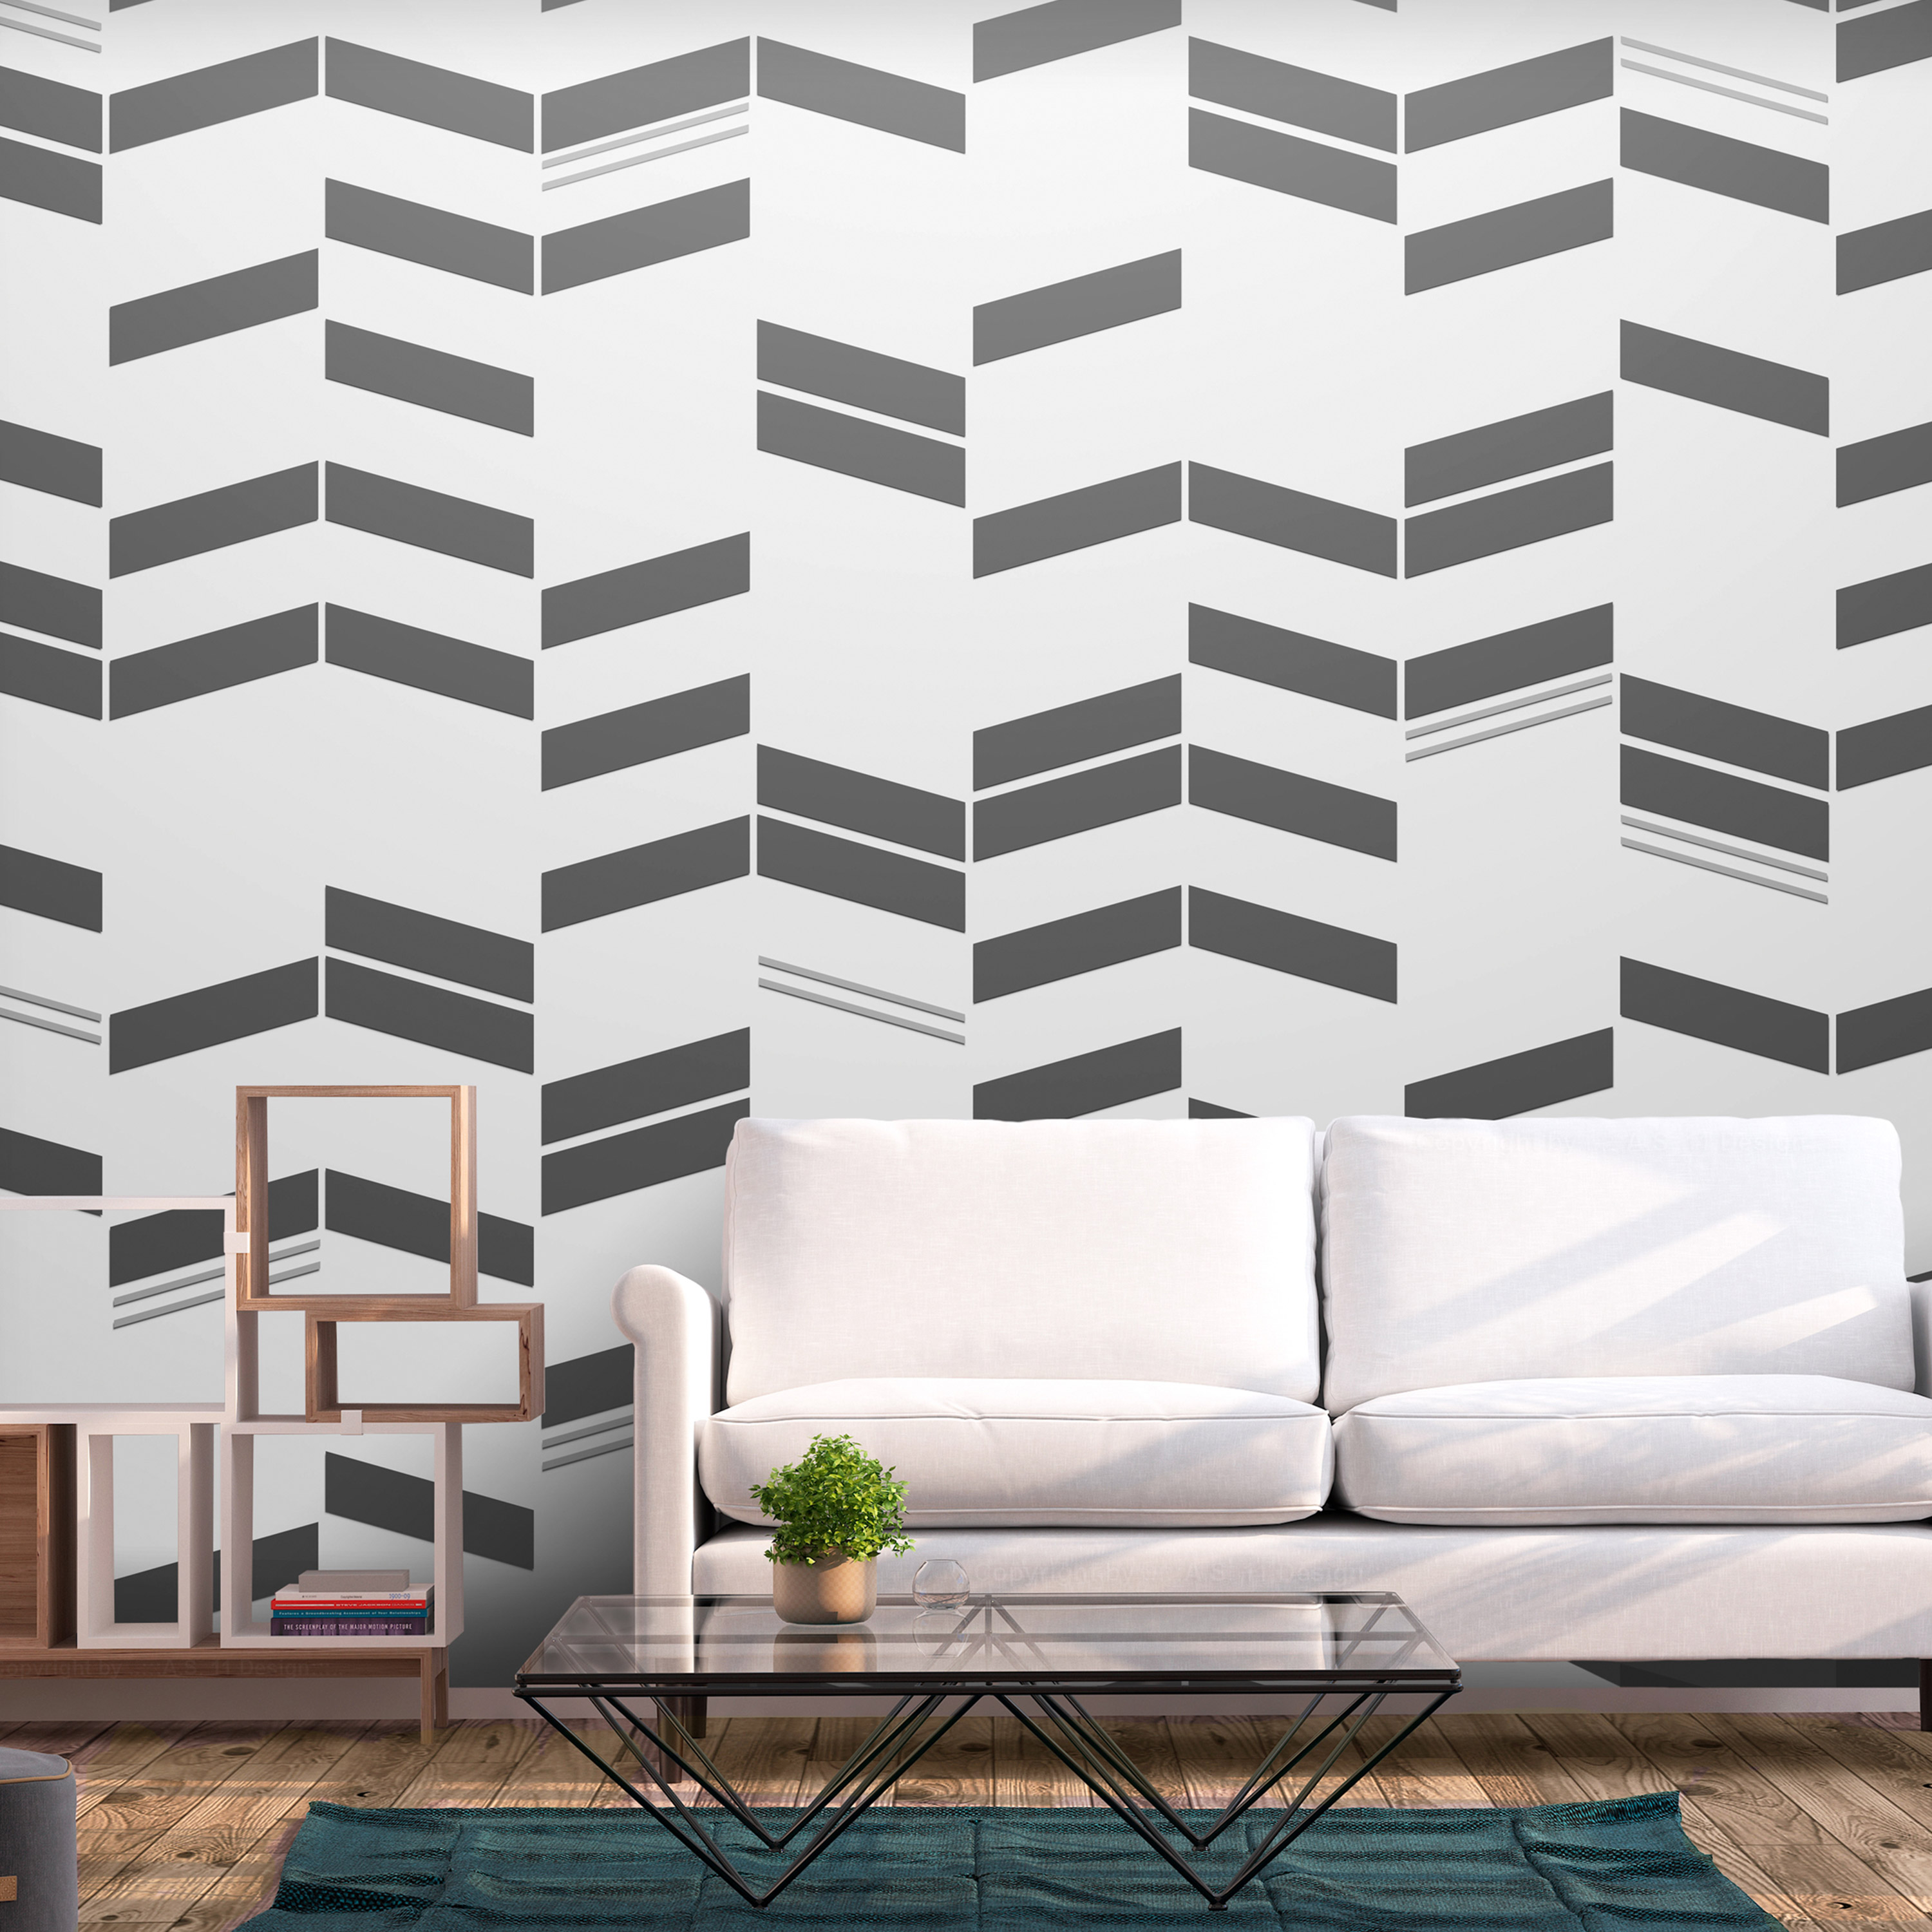 Self-adhesive Wallpaper - Simple Structures - 392x280